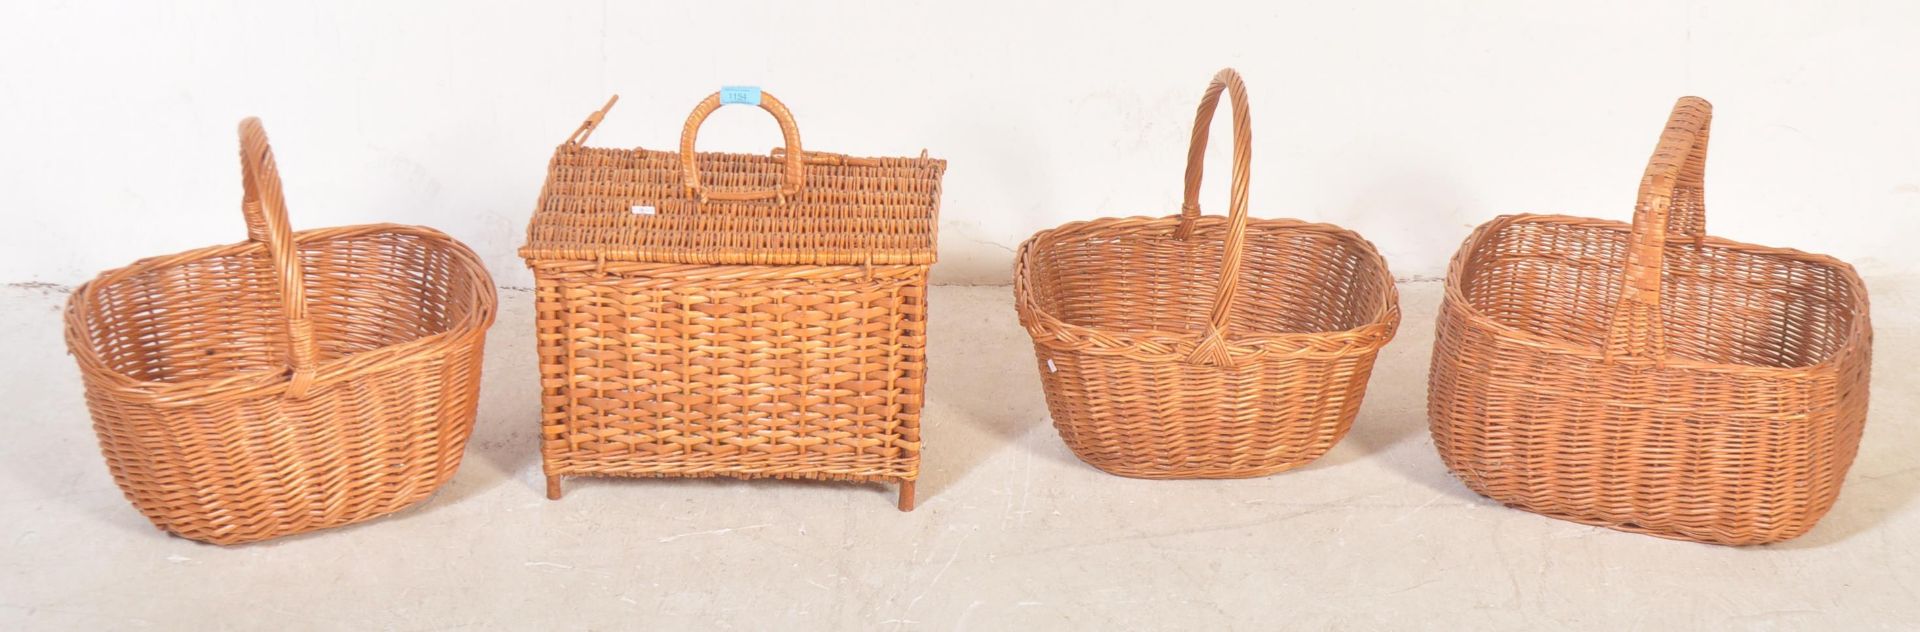 SET OF FOUR VINTAGE WICKER RATTAN PICNIC BASKETS - Image 2 of 5